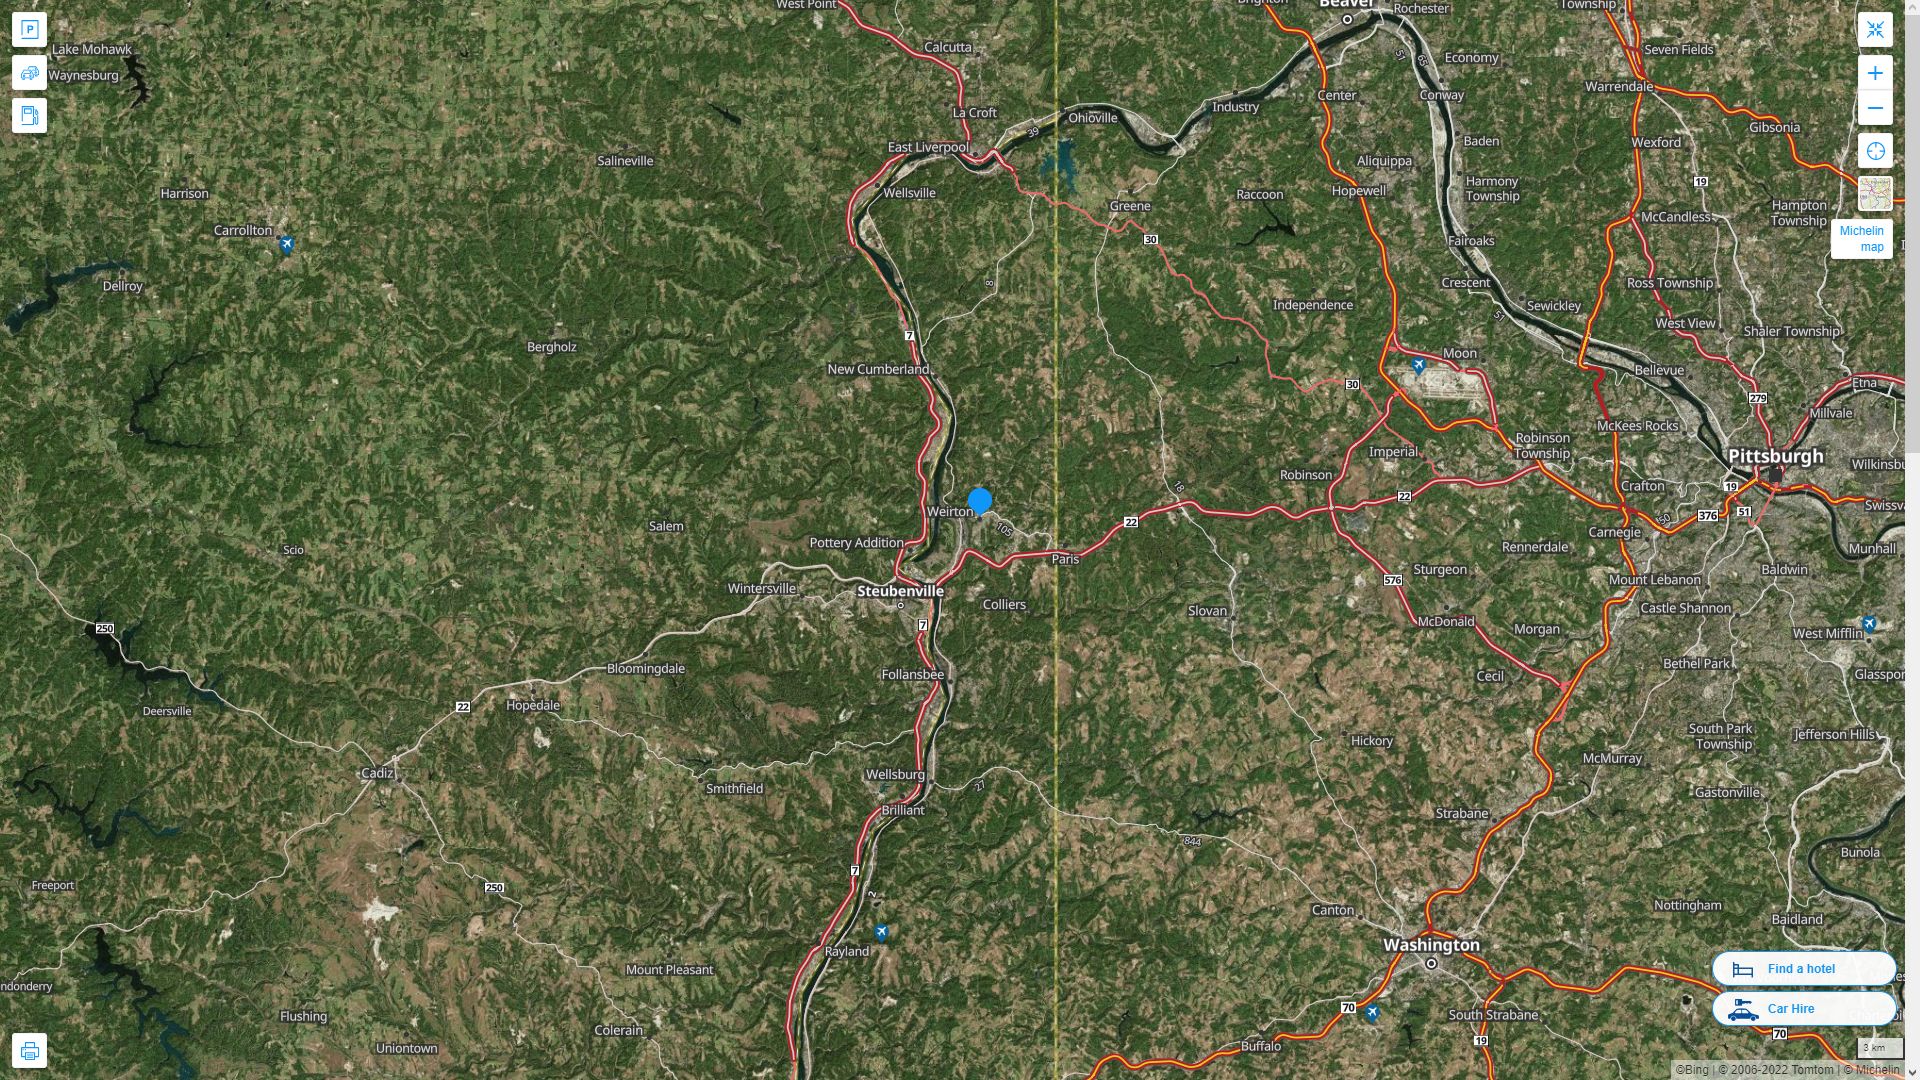 Weirton West Virginia Highway and Road Map with Satellite View